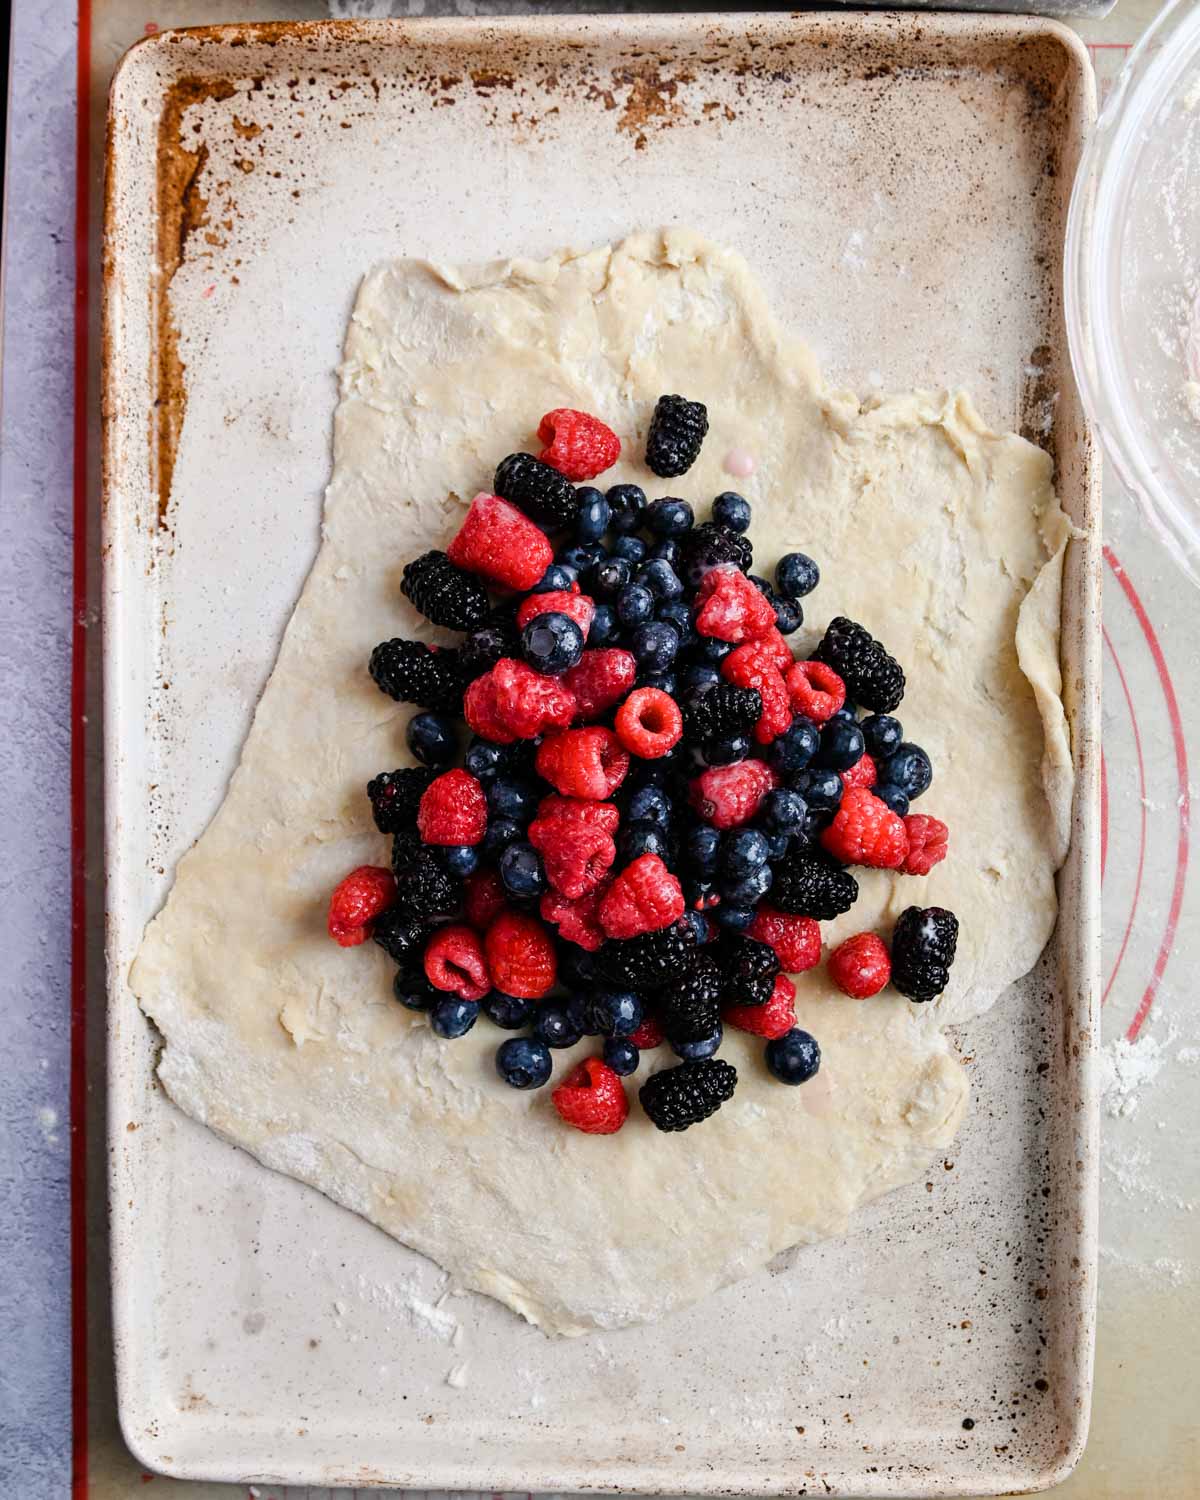 Berries in the center of galette dough.